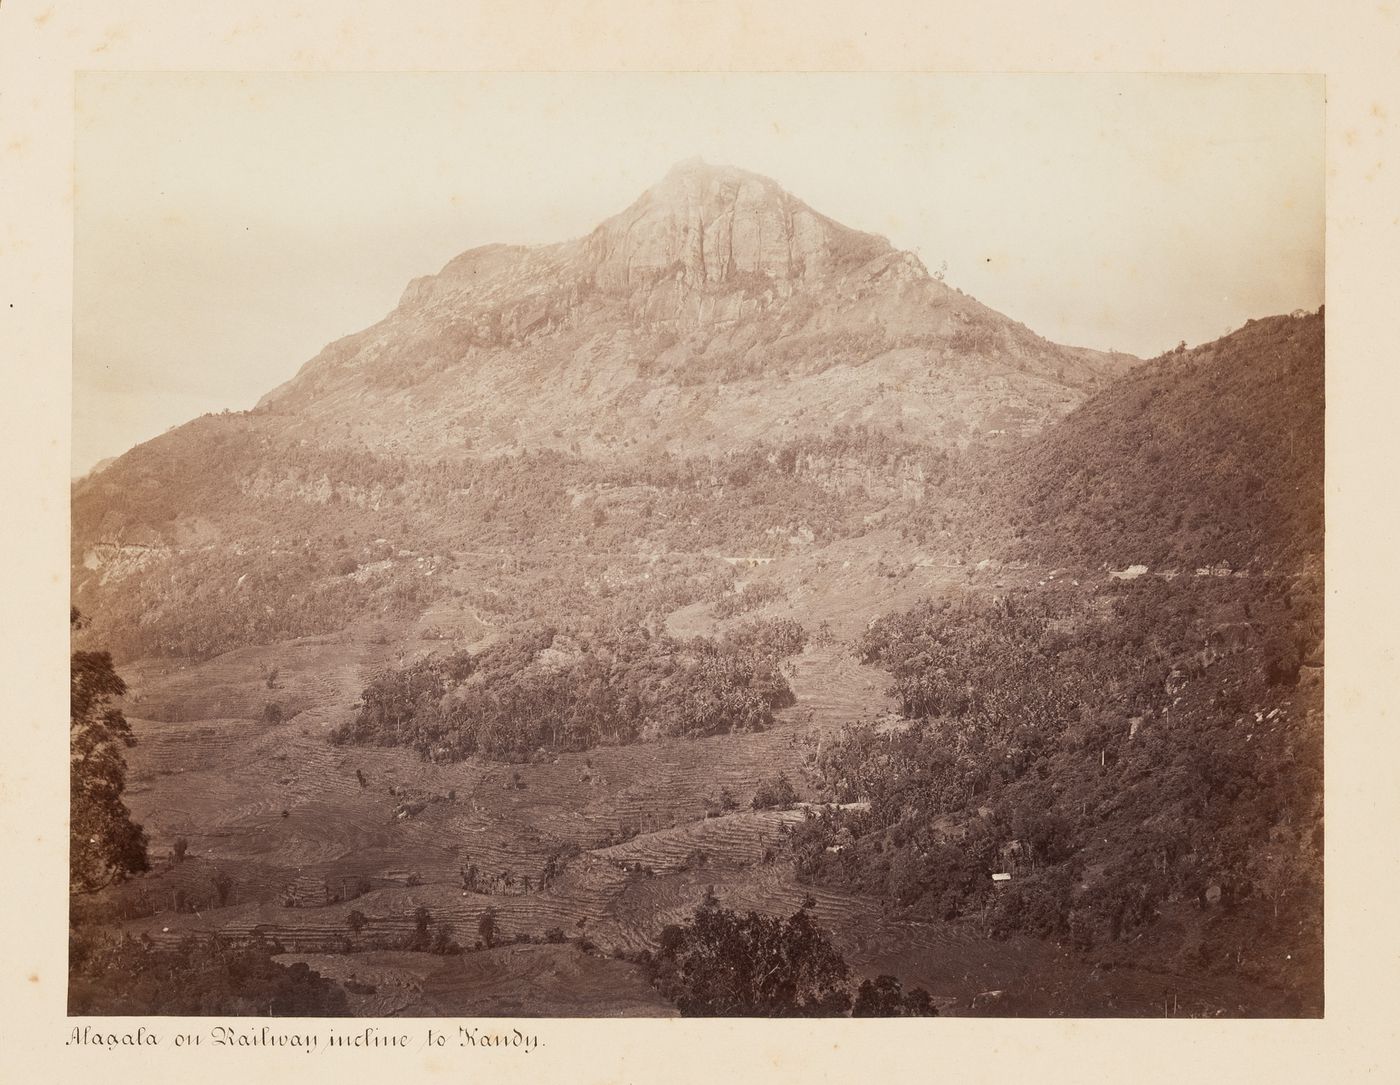 View of a mountain and valley showing the Colombo-Kandy Railway, Allagalla, Ceylon (now Sri Lanka)